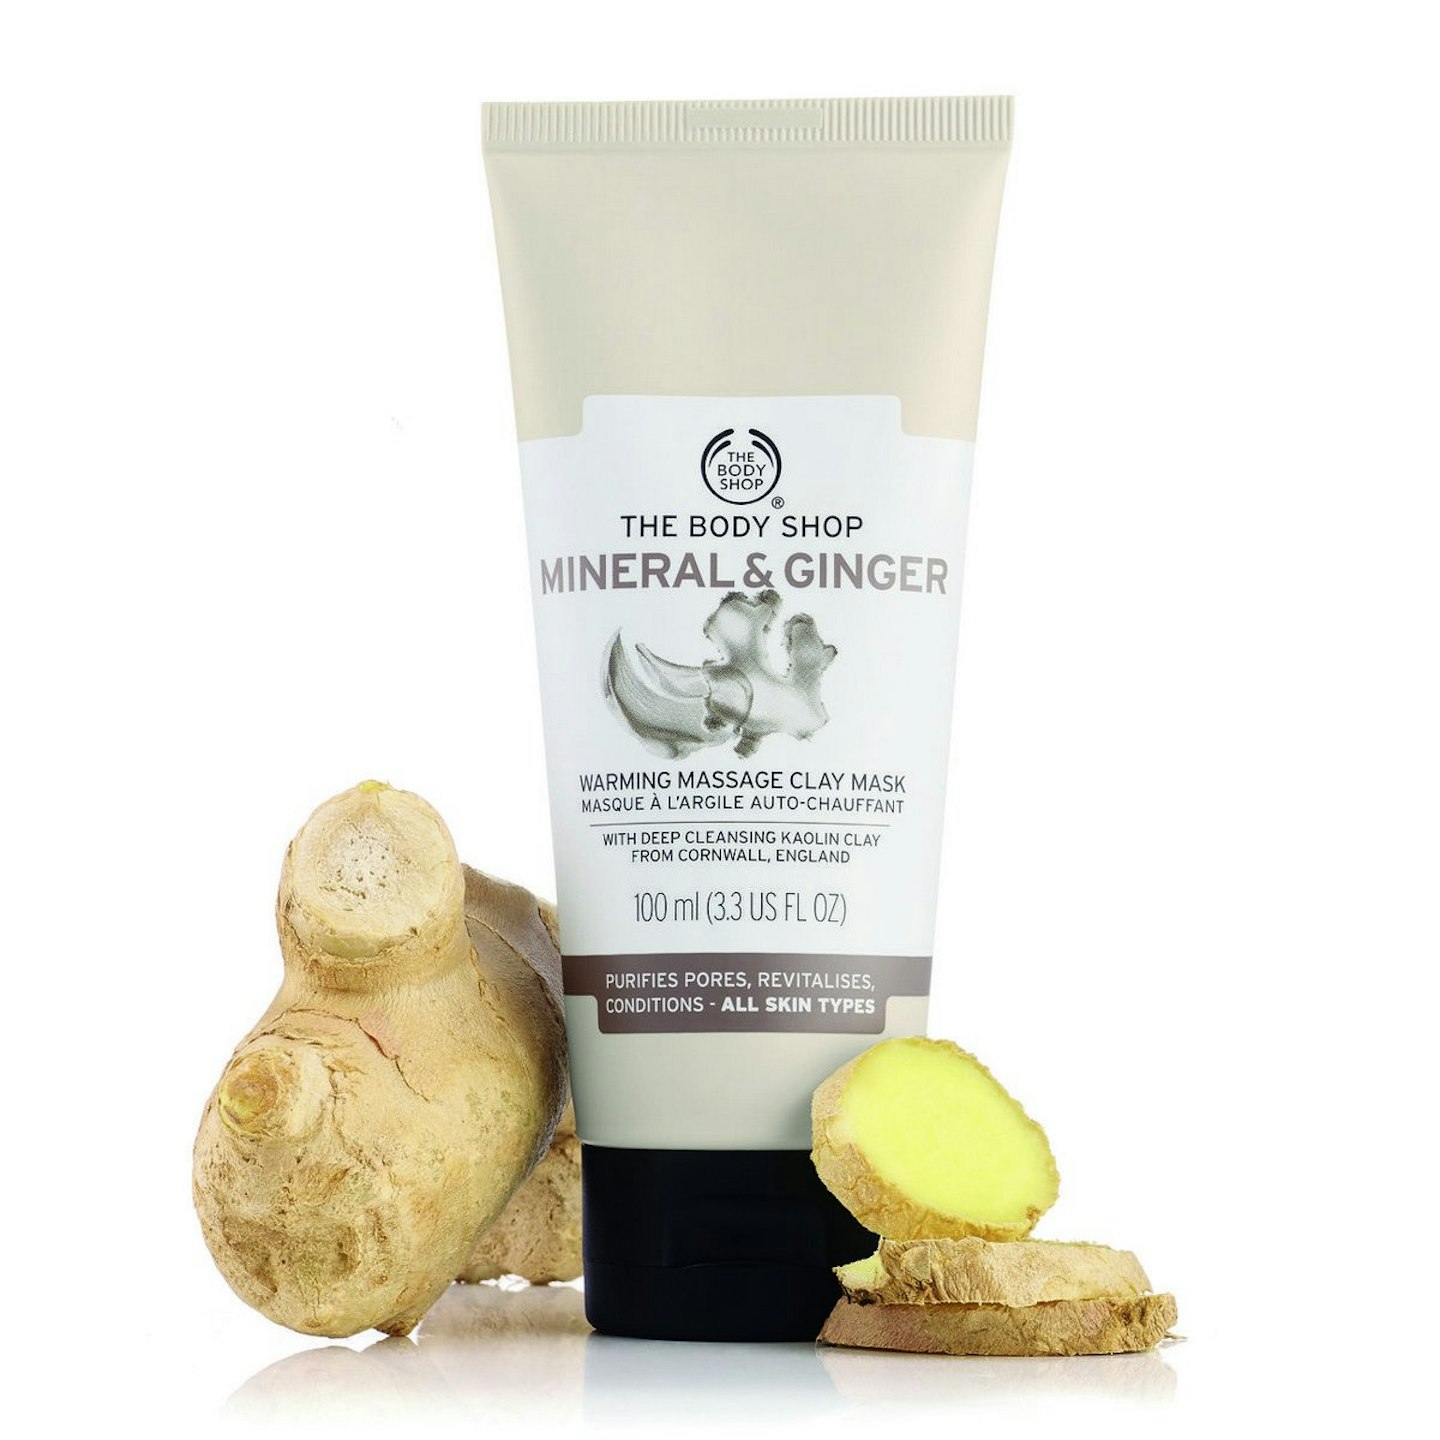 The Body Shop Mineral & Ginger Warming Massage Clay Mask